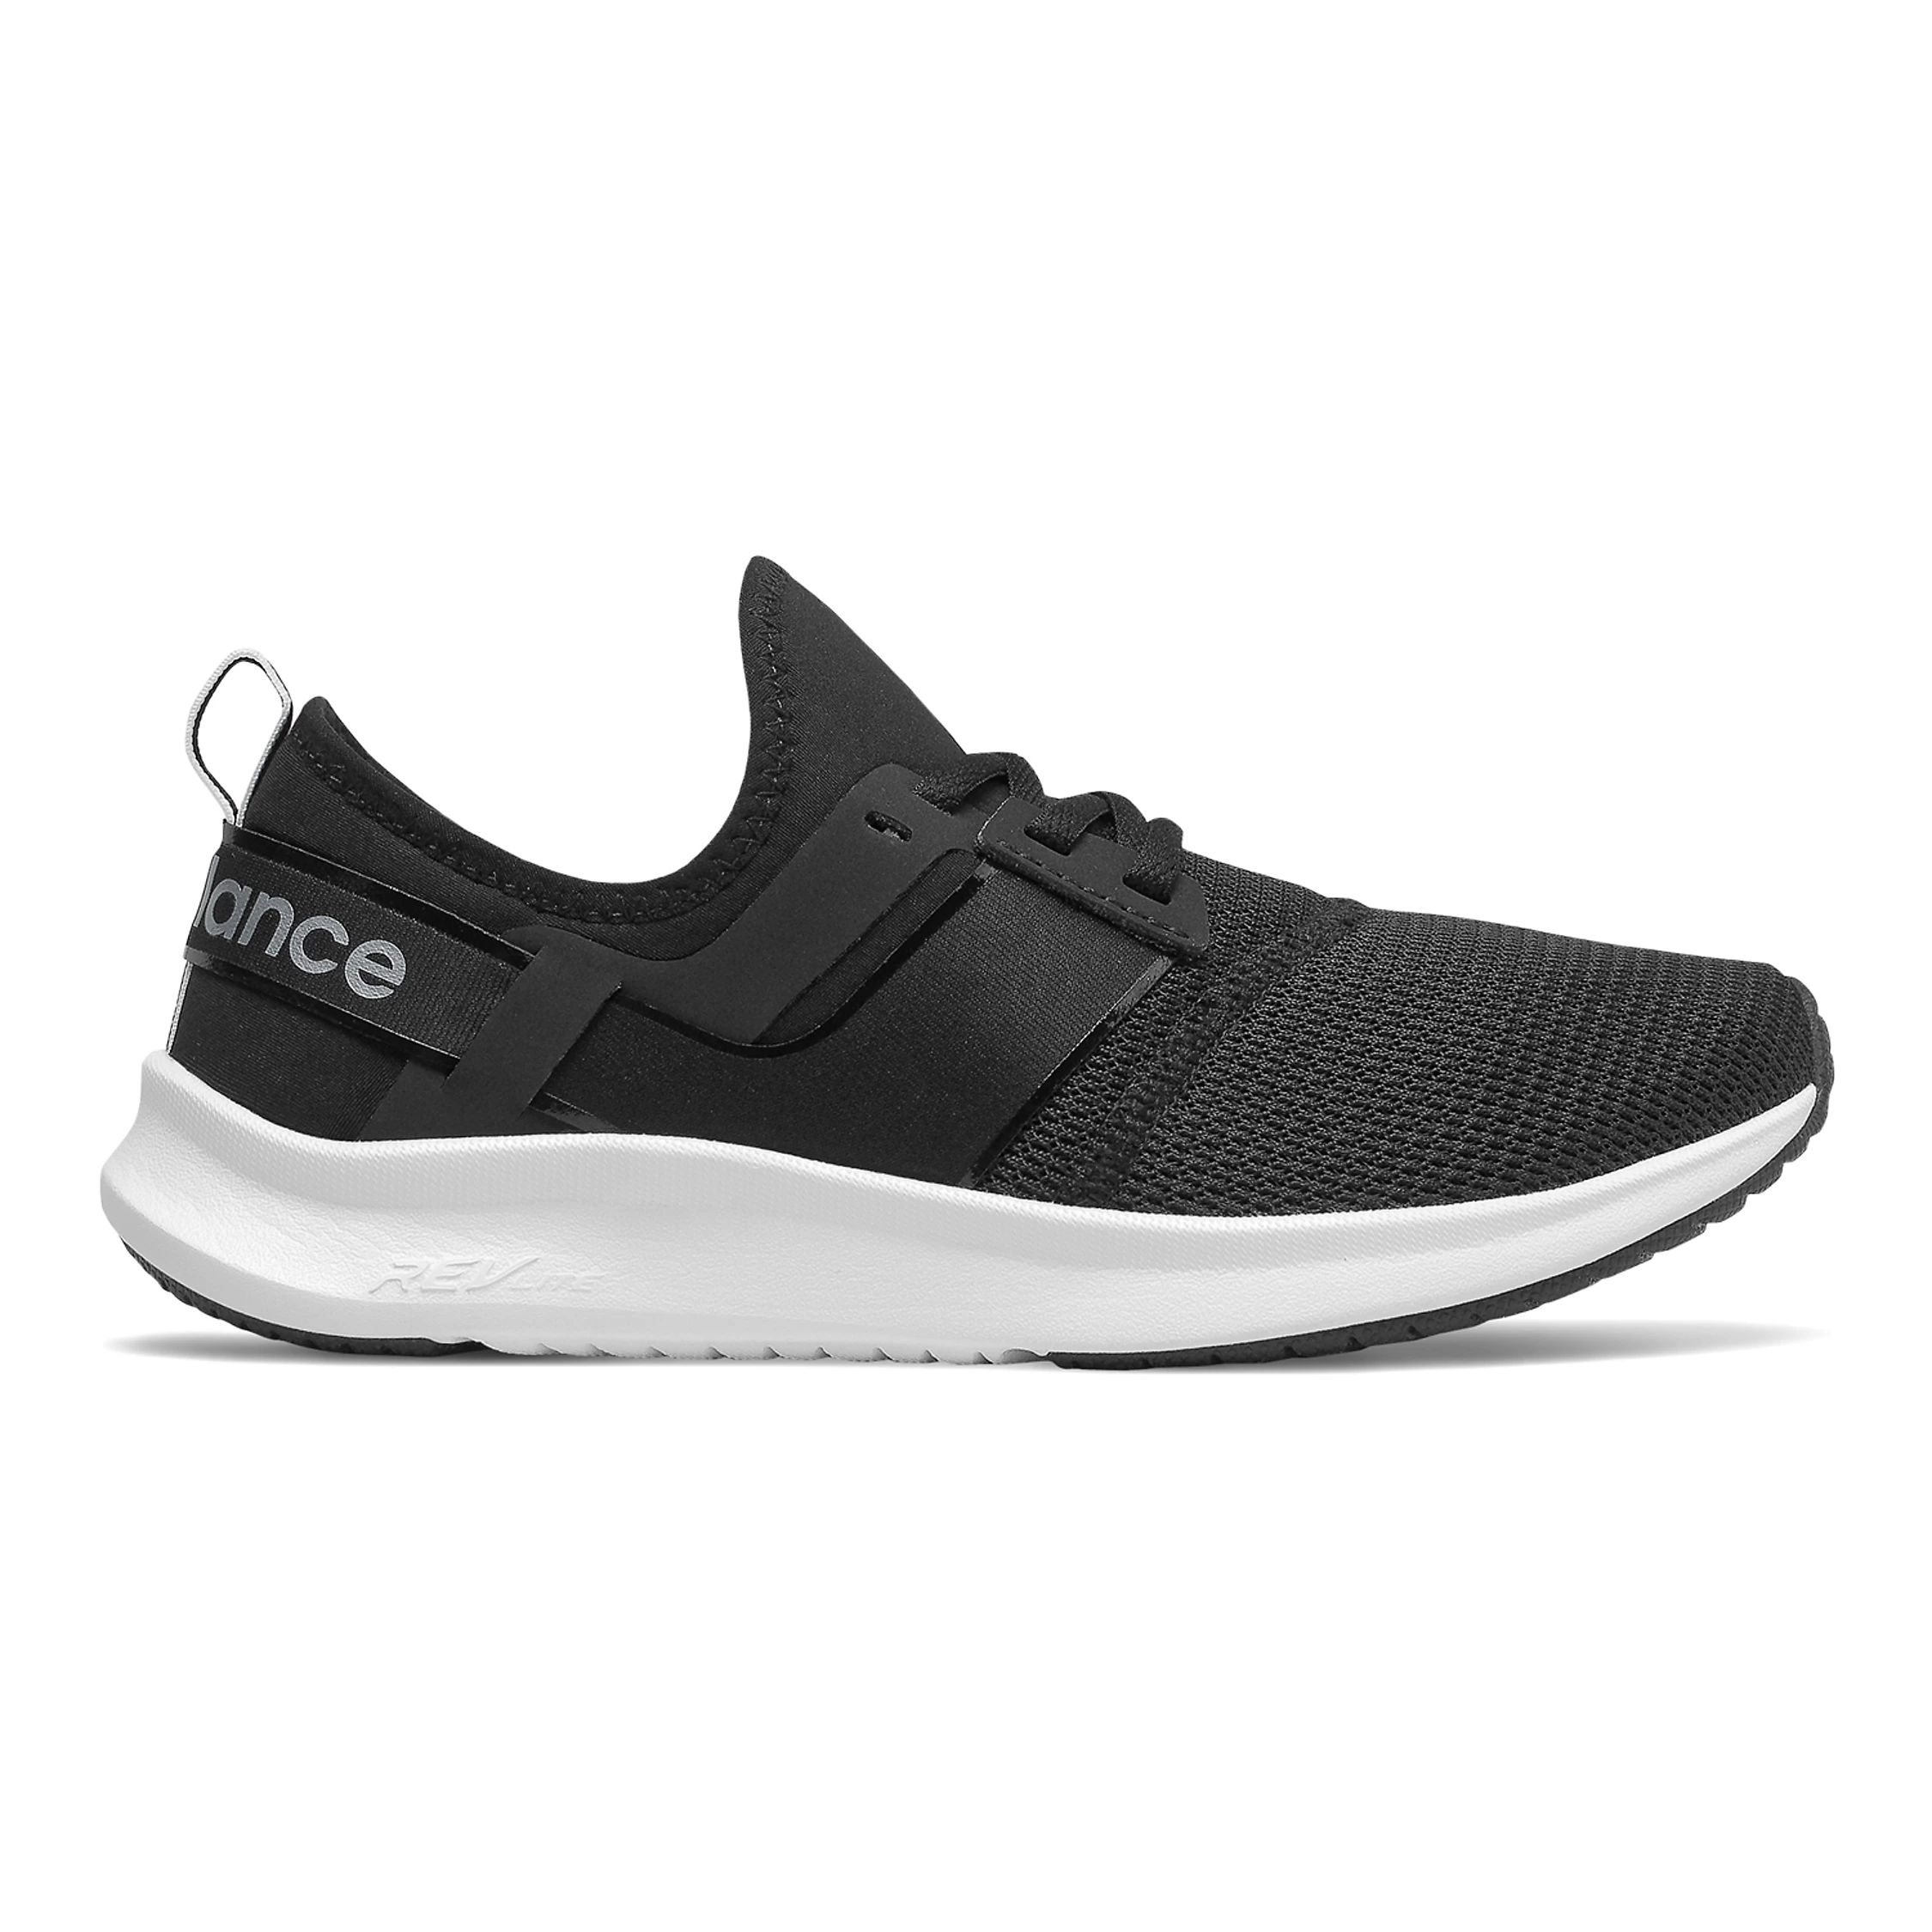 New Balance® FuelCore Nergize Sport Women's Sneakers | Kohl's